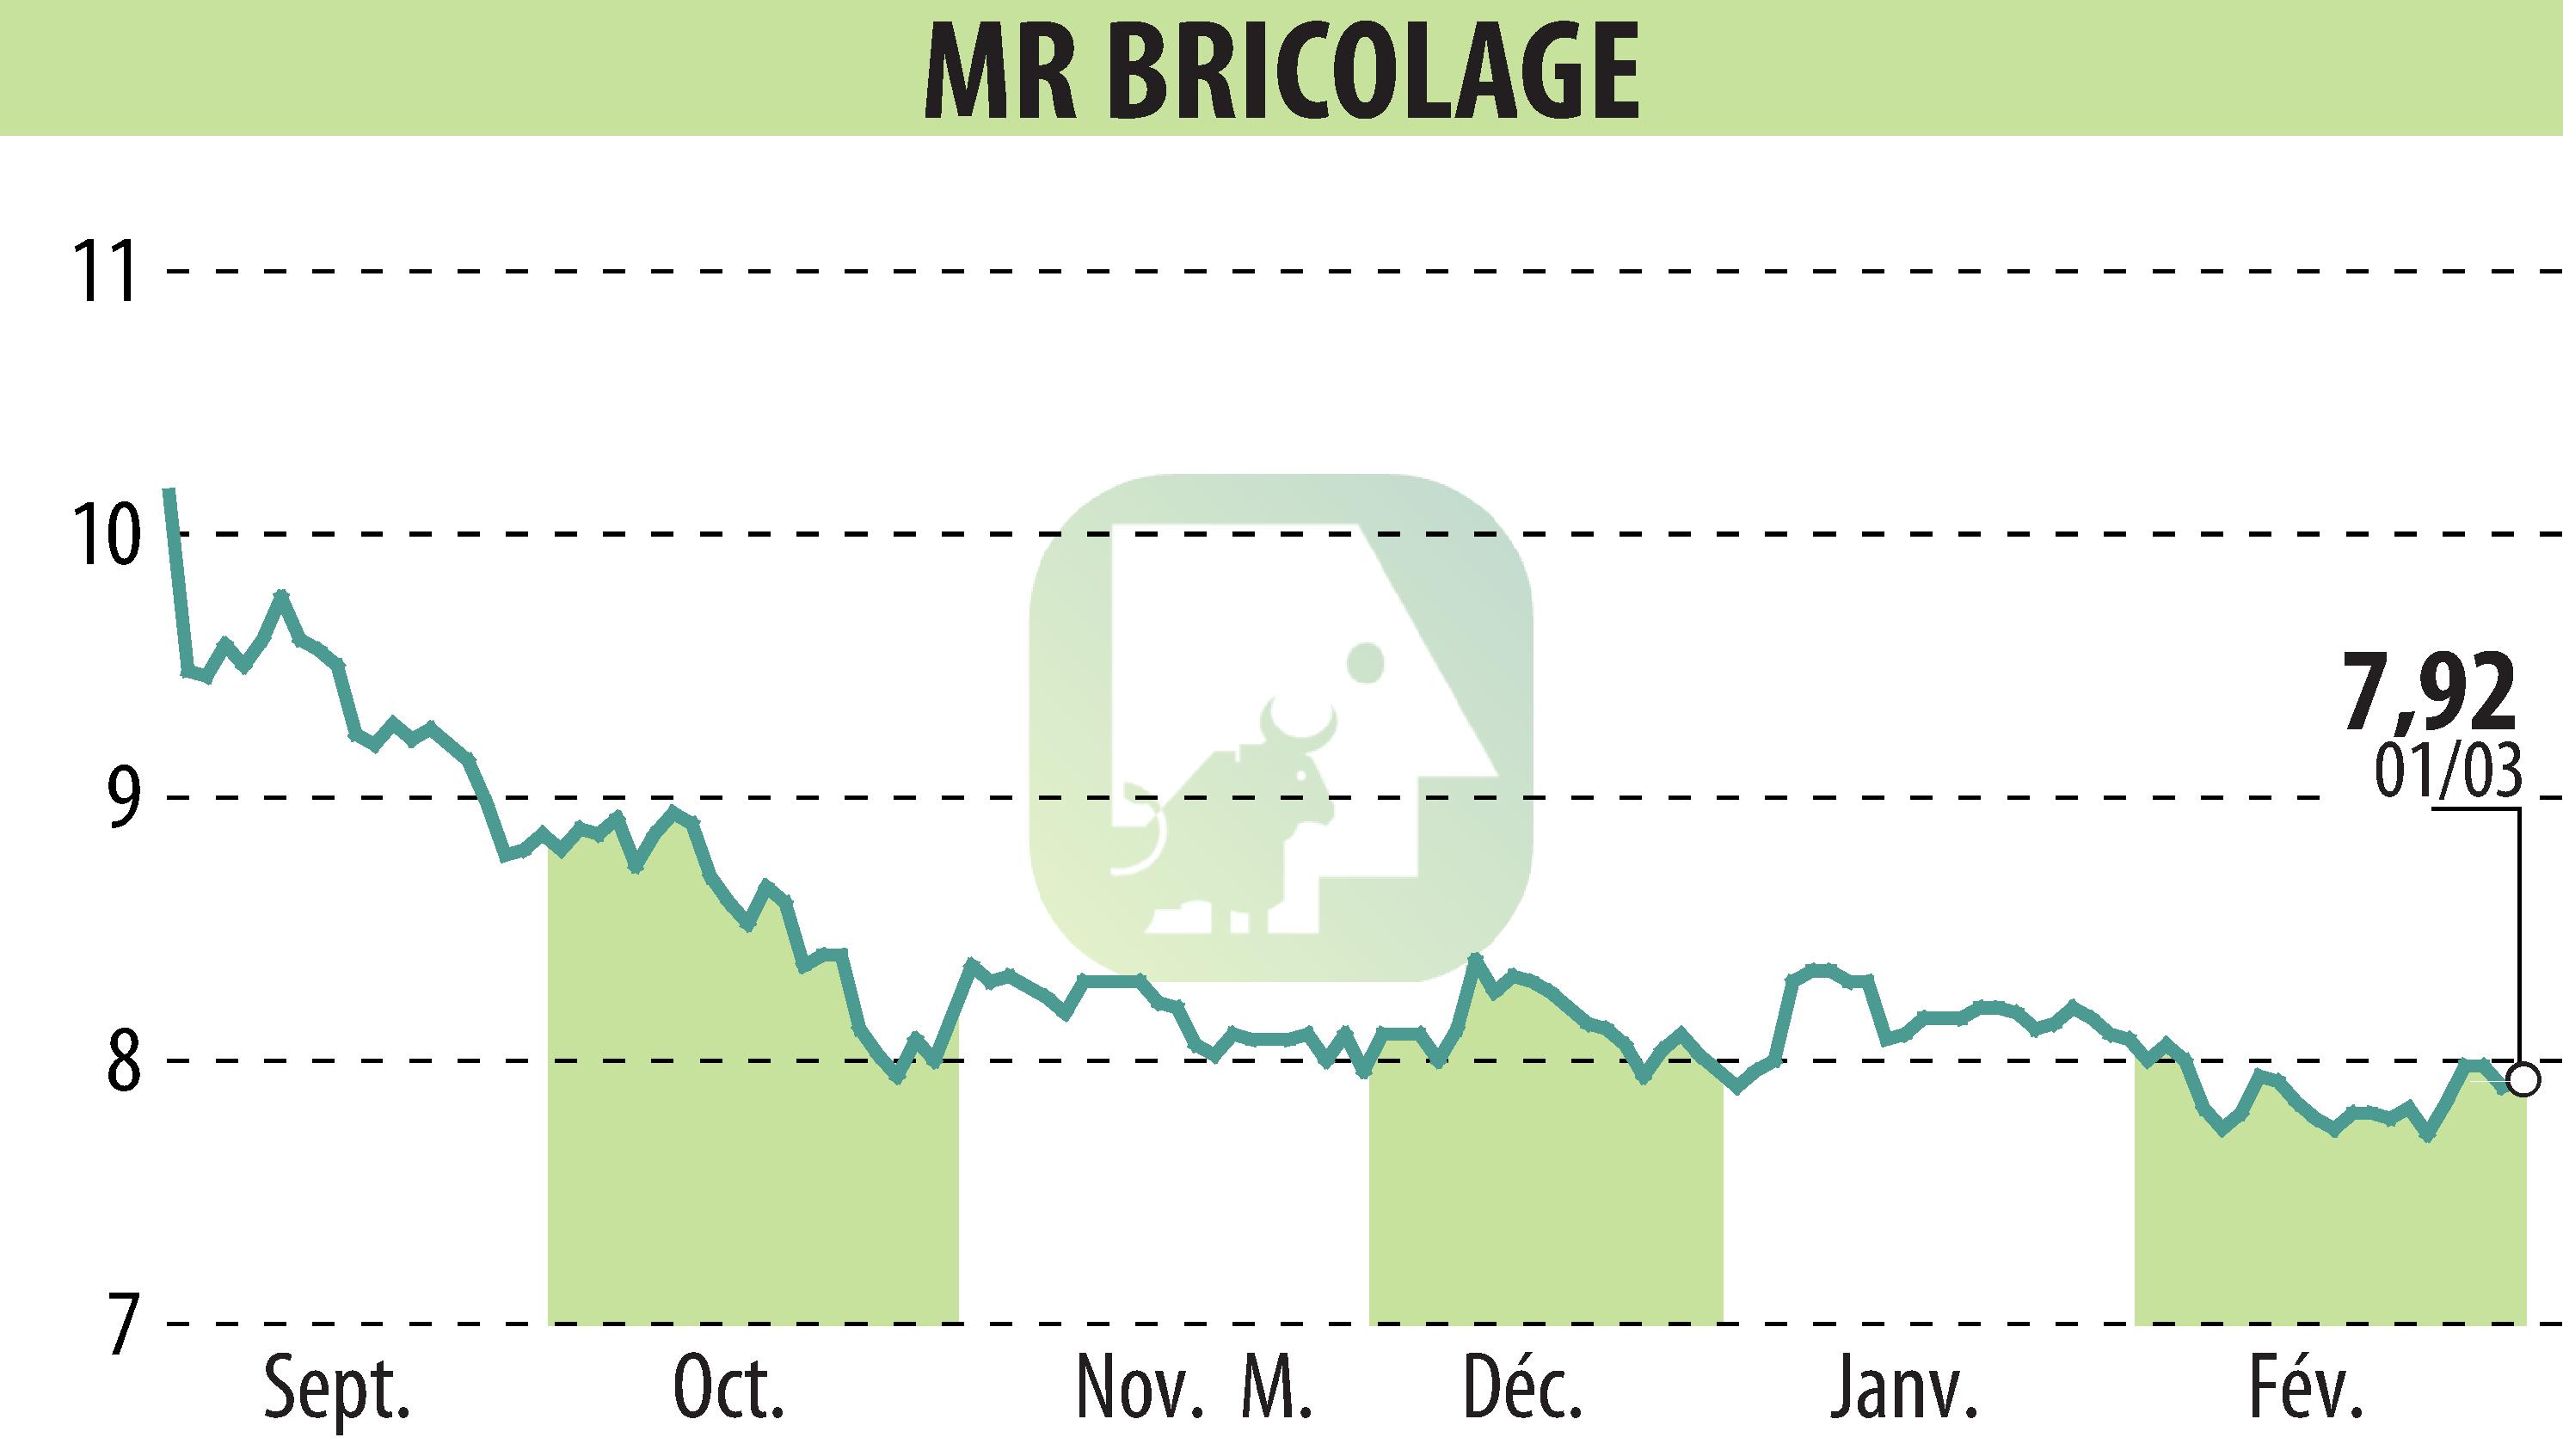 Stock price chart of MR BRICOLAGE (EPA:ALMRB) showing fluctuations